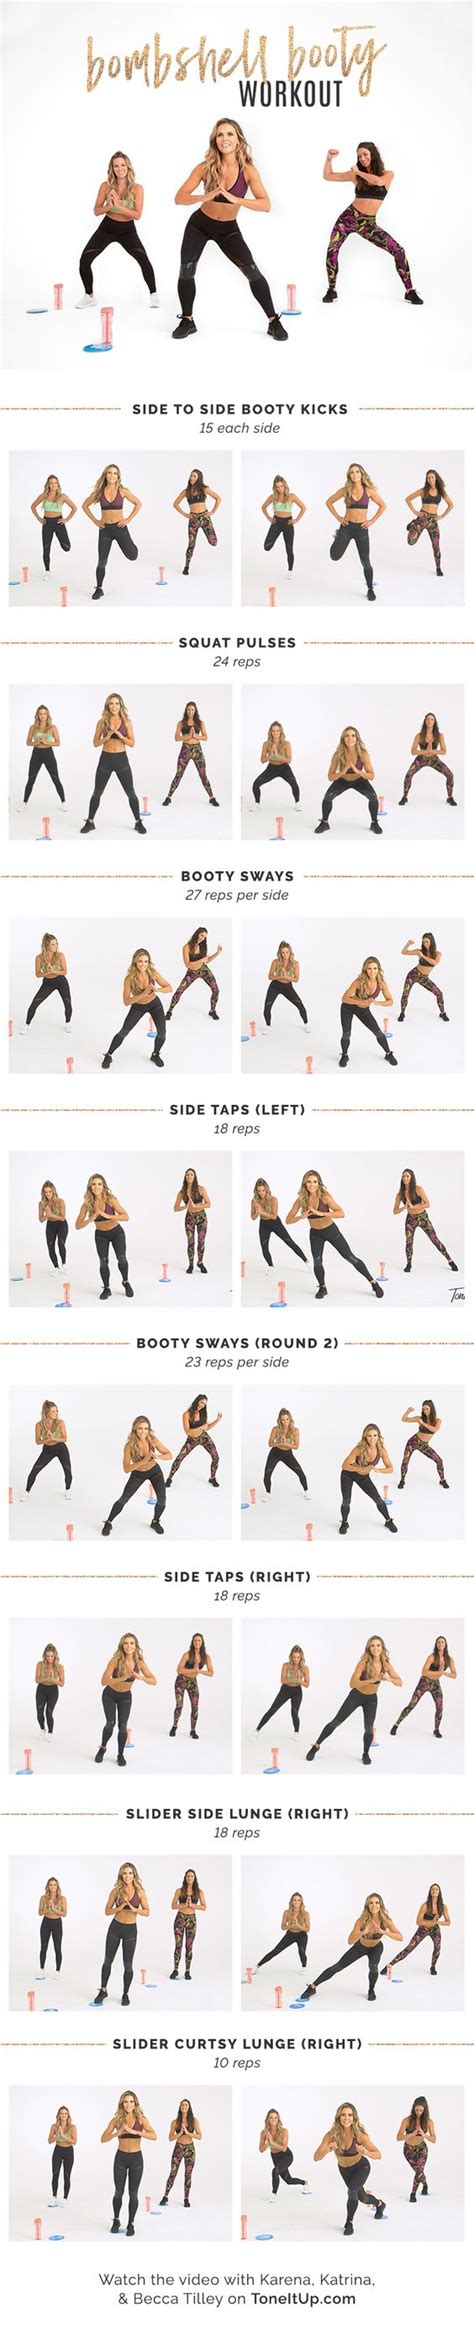 Intense Booty Workouts That Will Give You A Bigger Firmer Butt